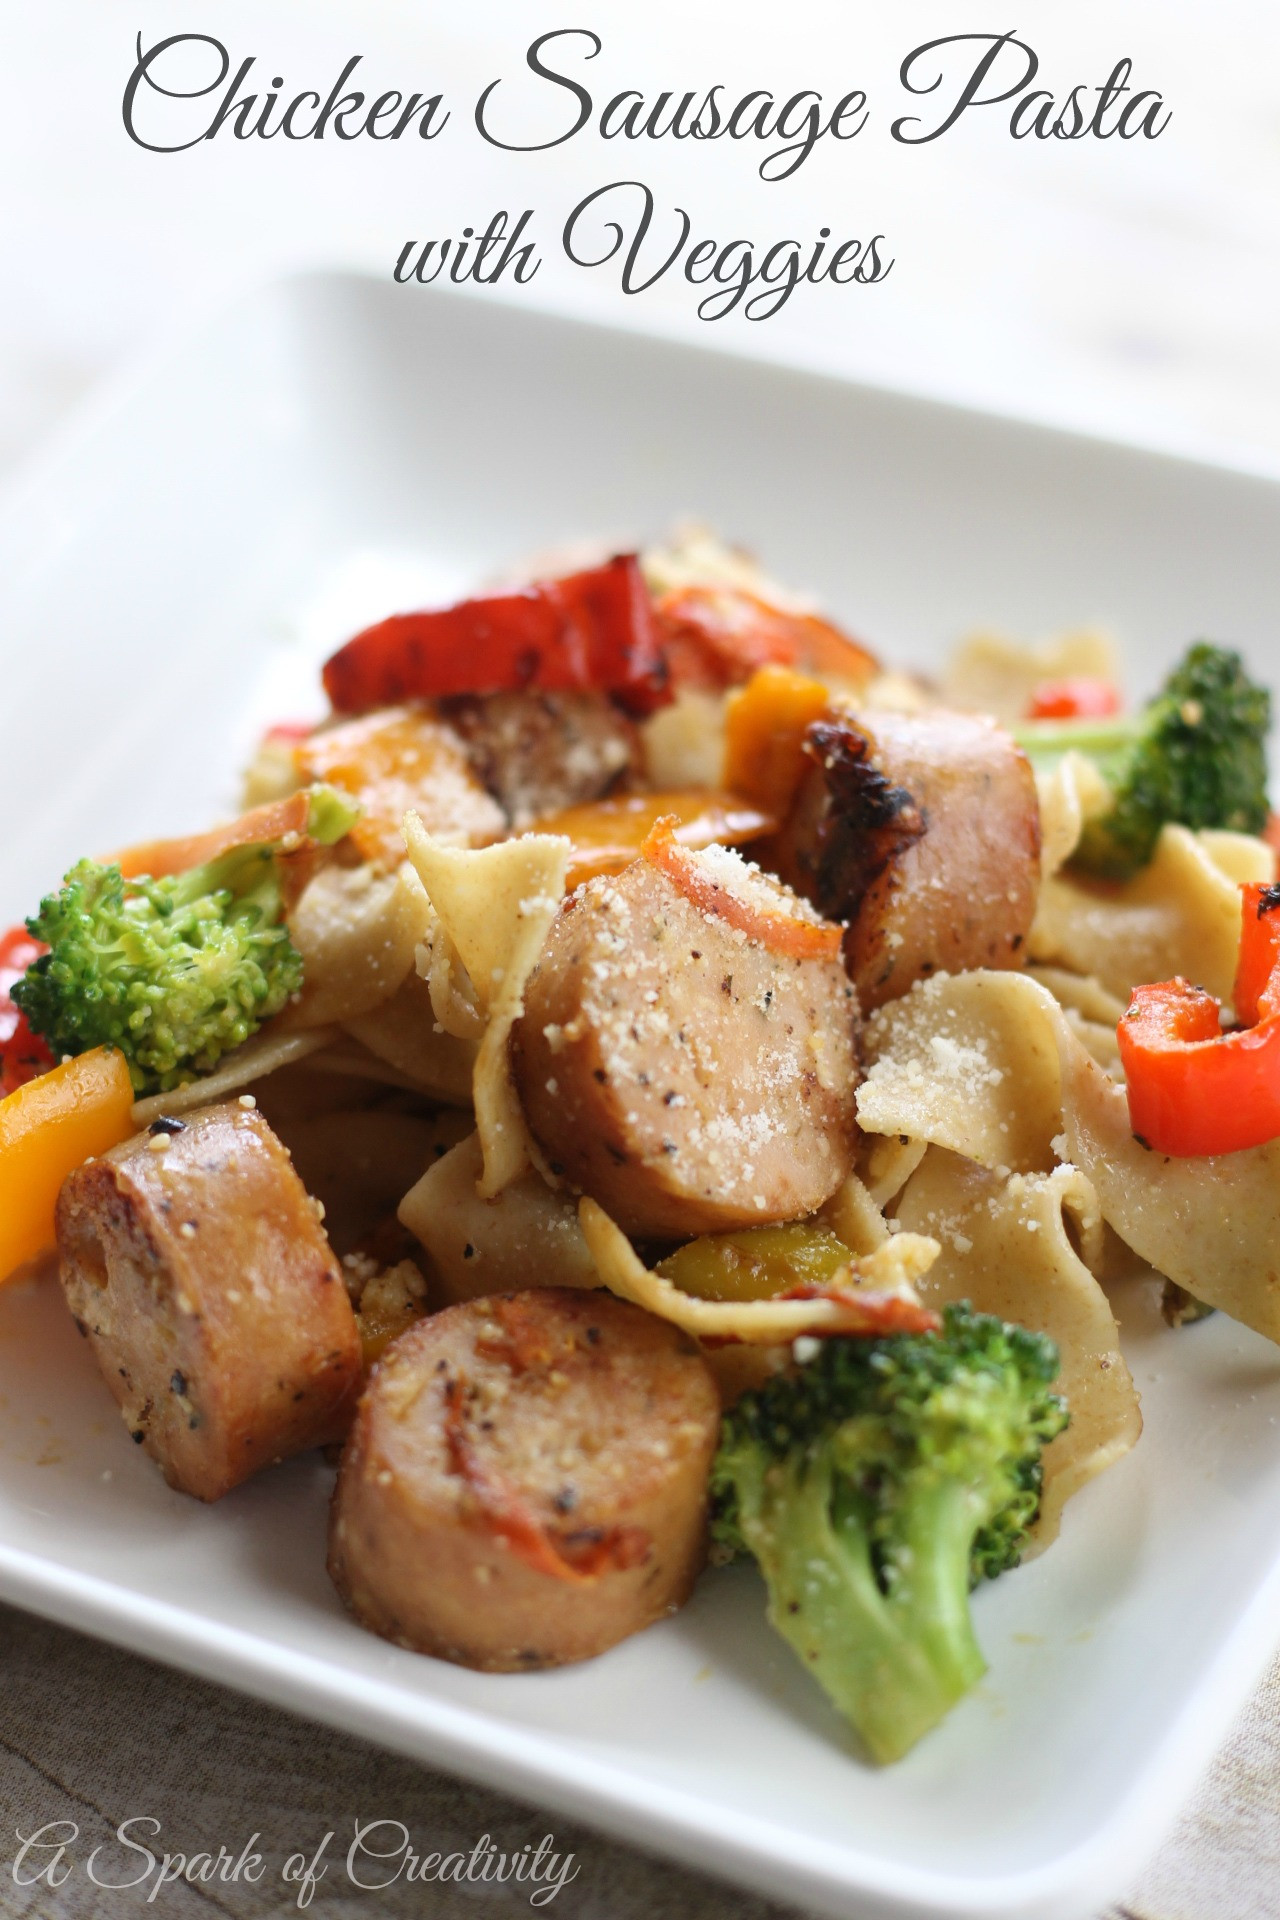 Breakfast Sausage Recipes For Dinner
 Kid Friendly Chicken Sausage Pasta with Veggies A Spark